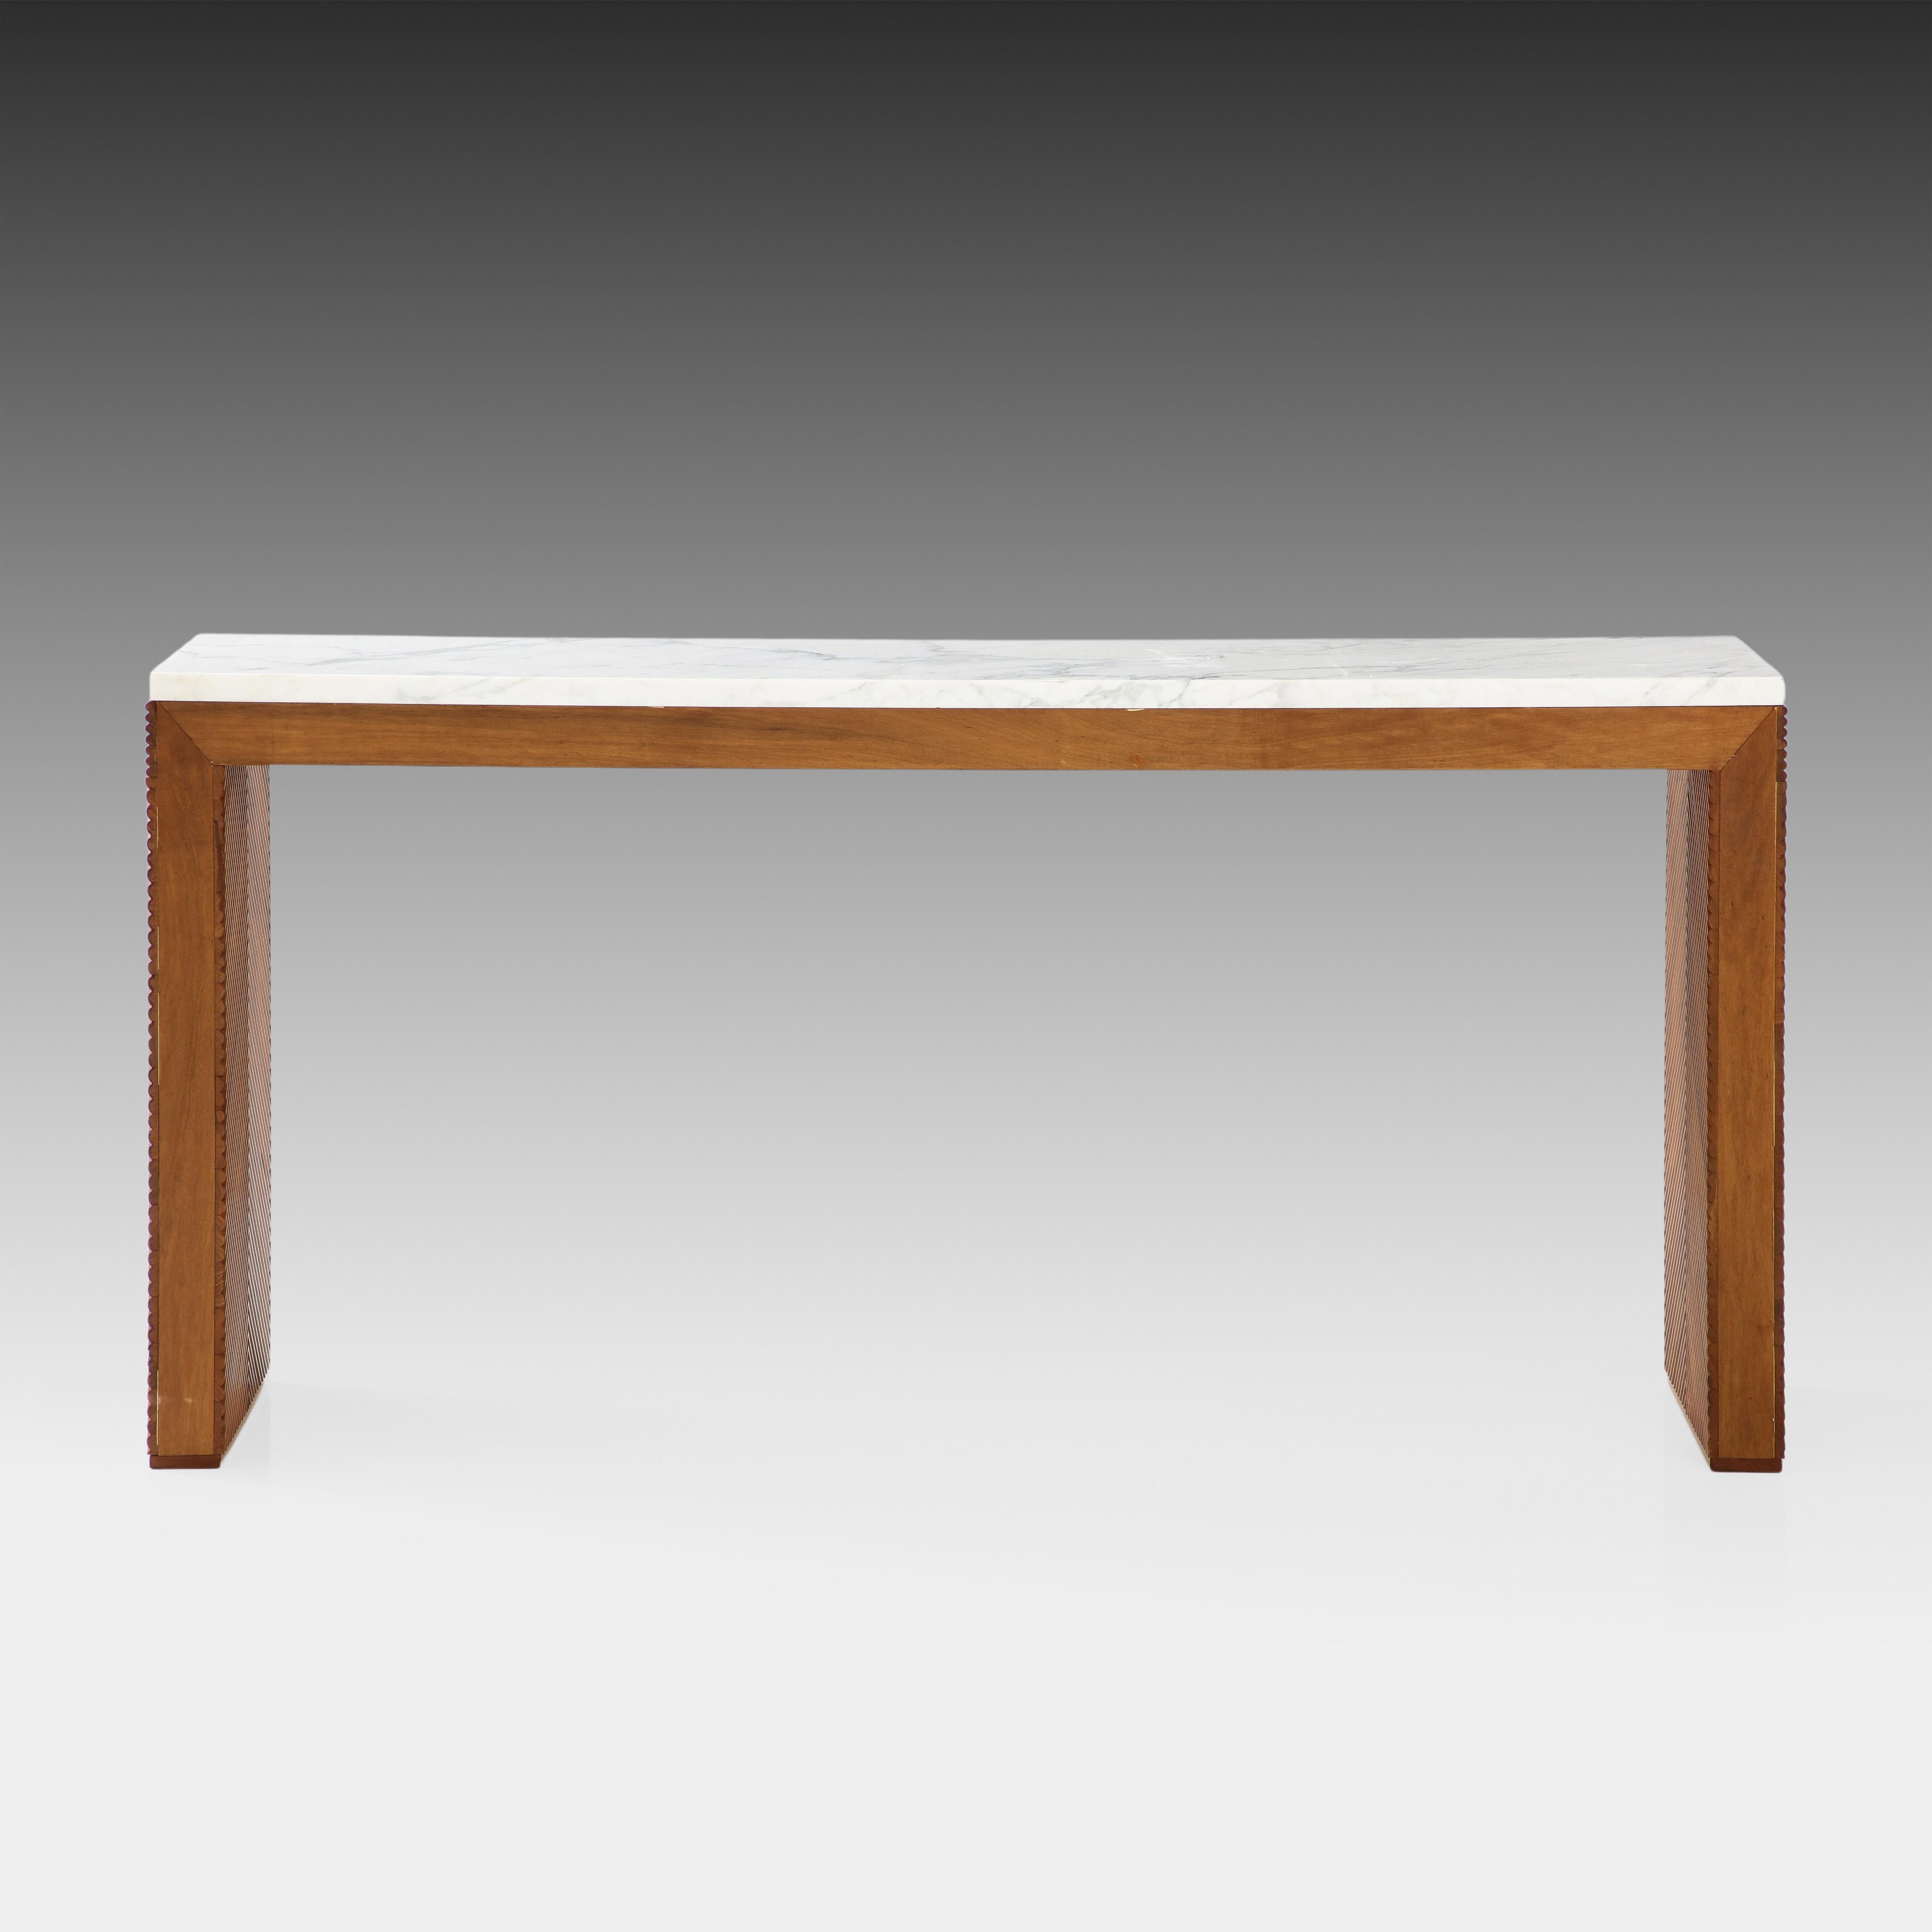 Contemporary Italian Cherry Wood and Carrara Marble Console In New Condition For Sale In New York, NY